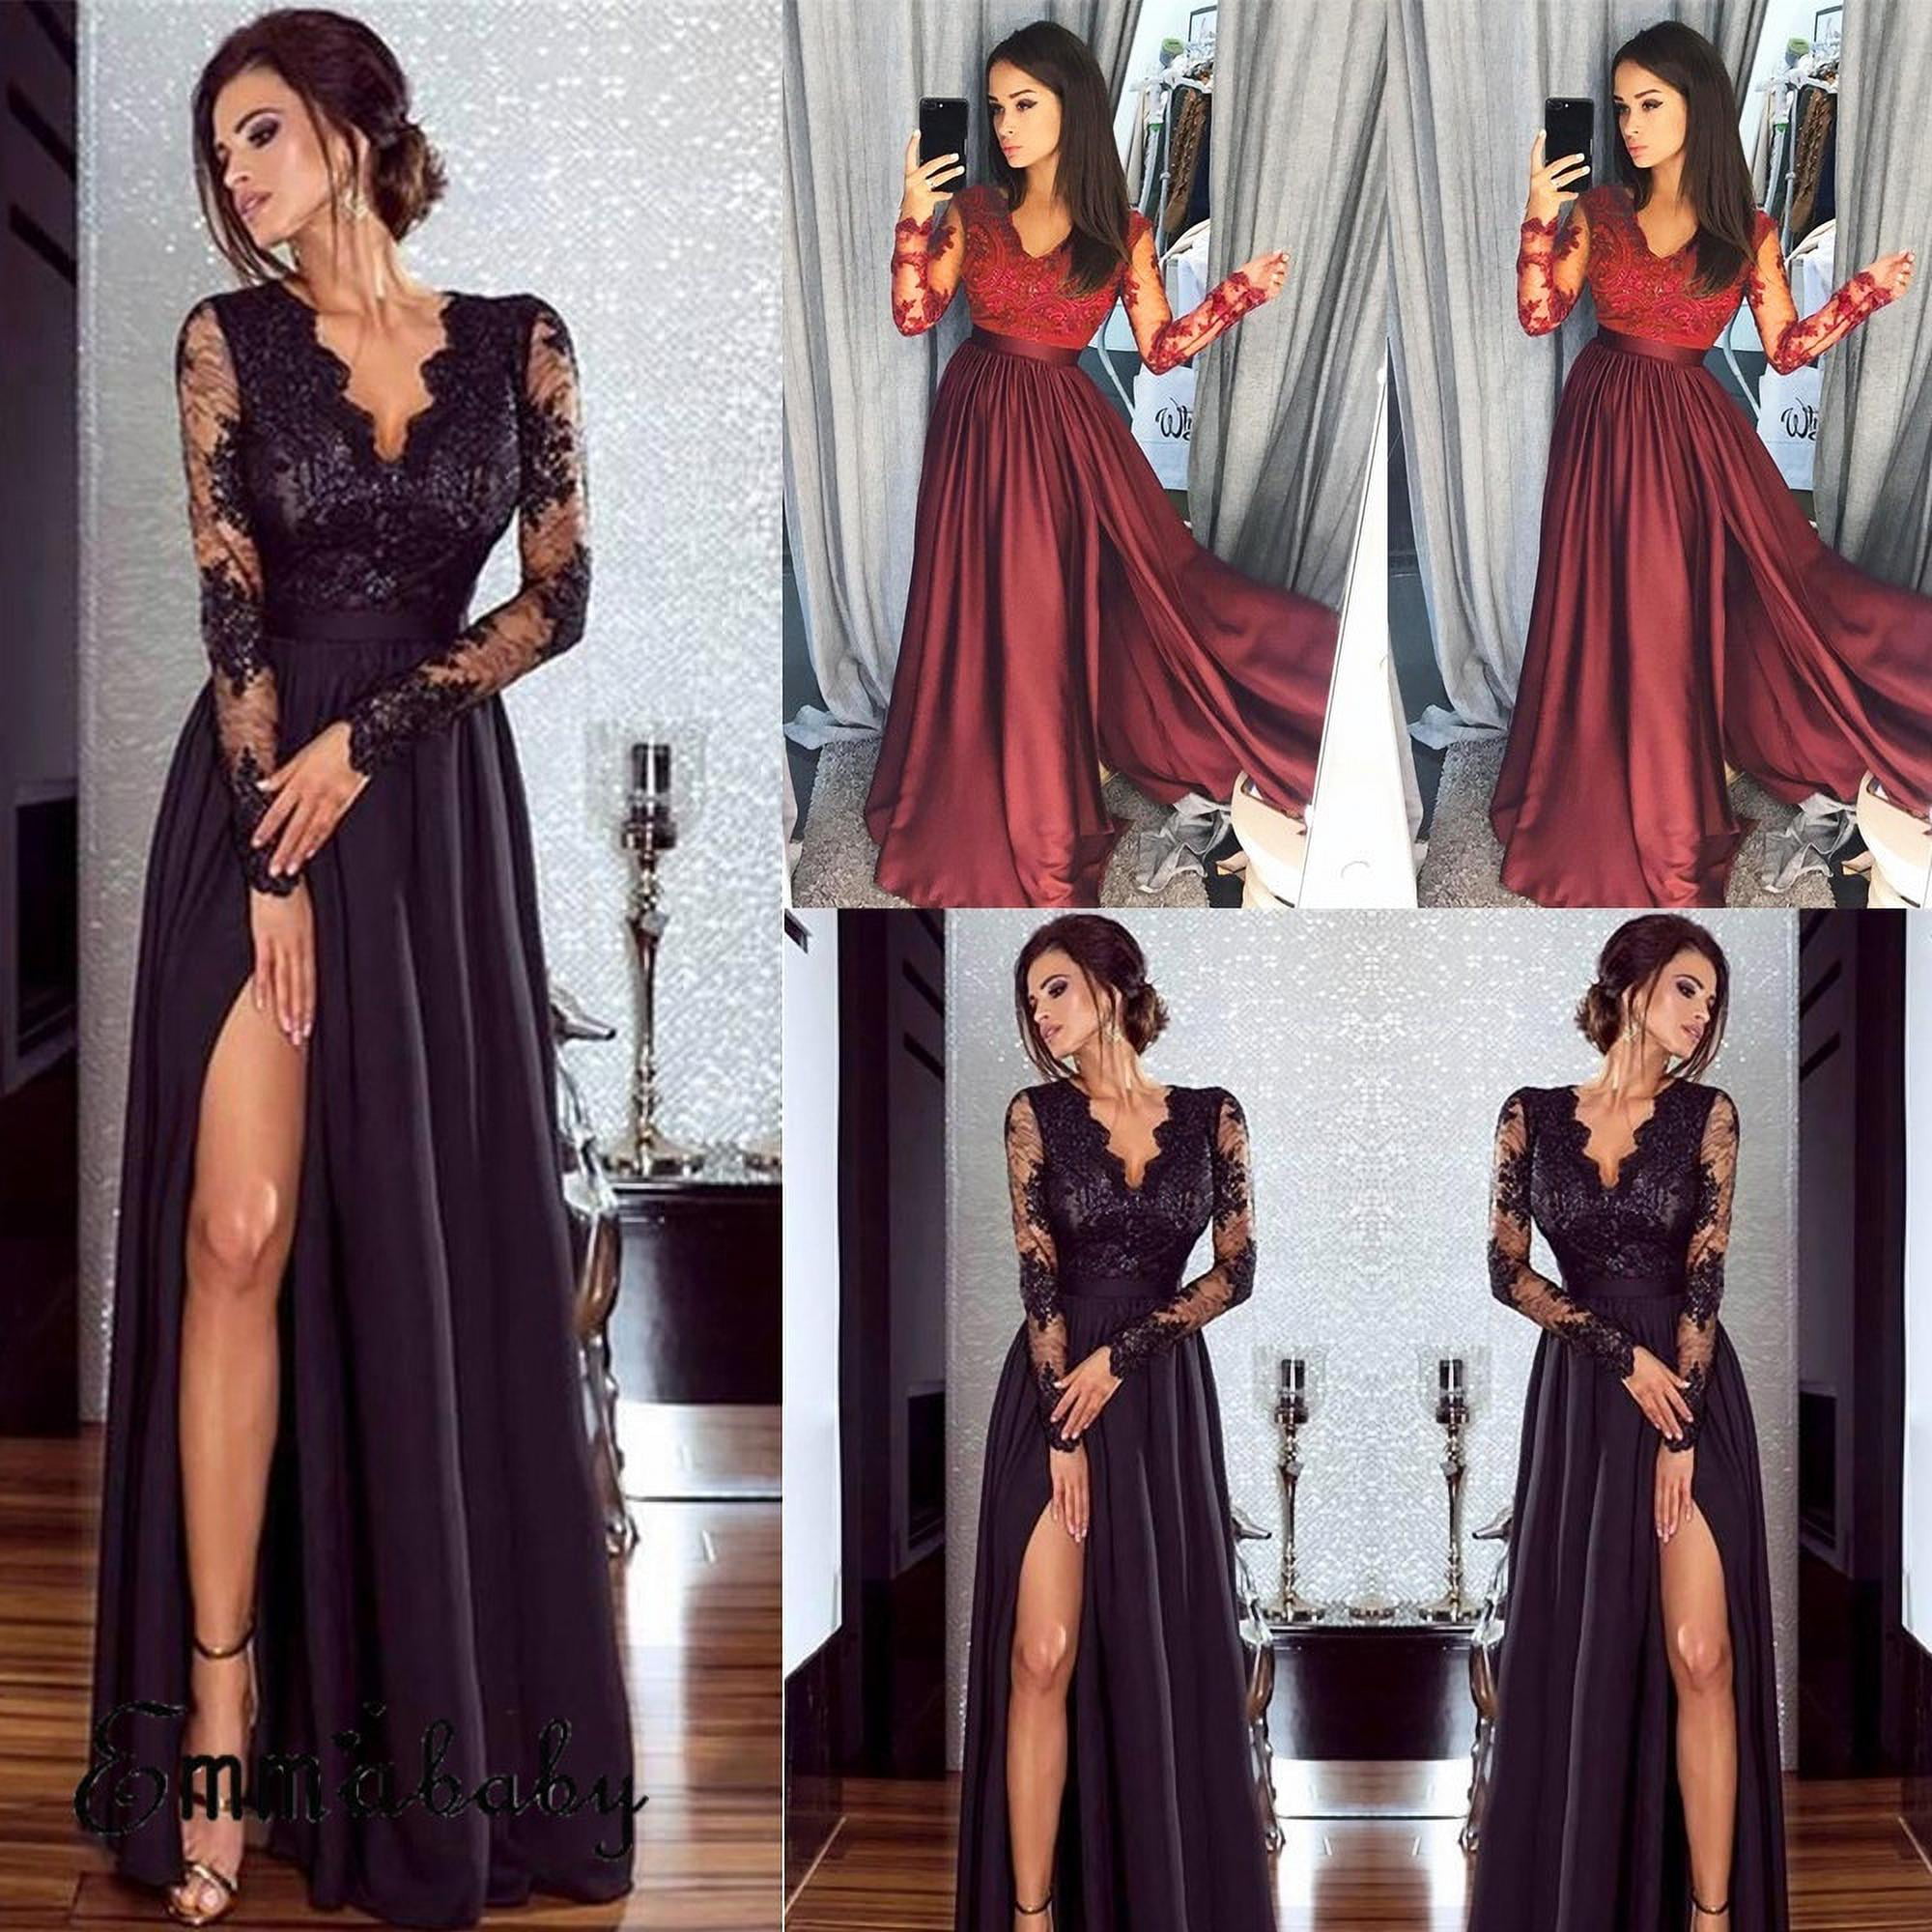 Women's Two Piece Long Sleeve Prom Evening Dresses Lace Beaded Party Gown  Burgundy Custom Size at Amazon Women's Clothing store